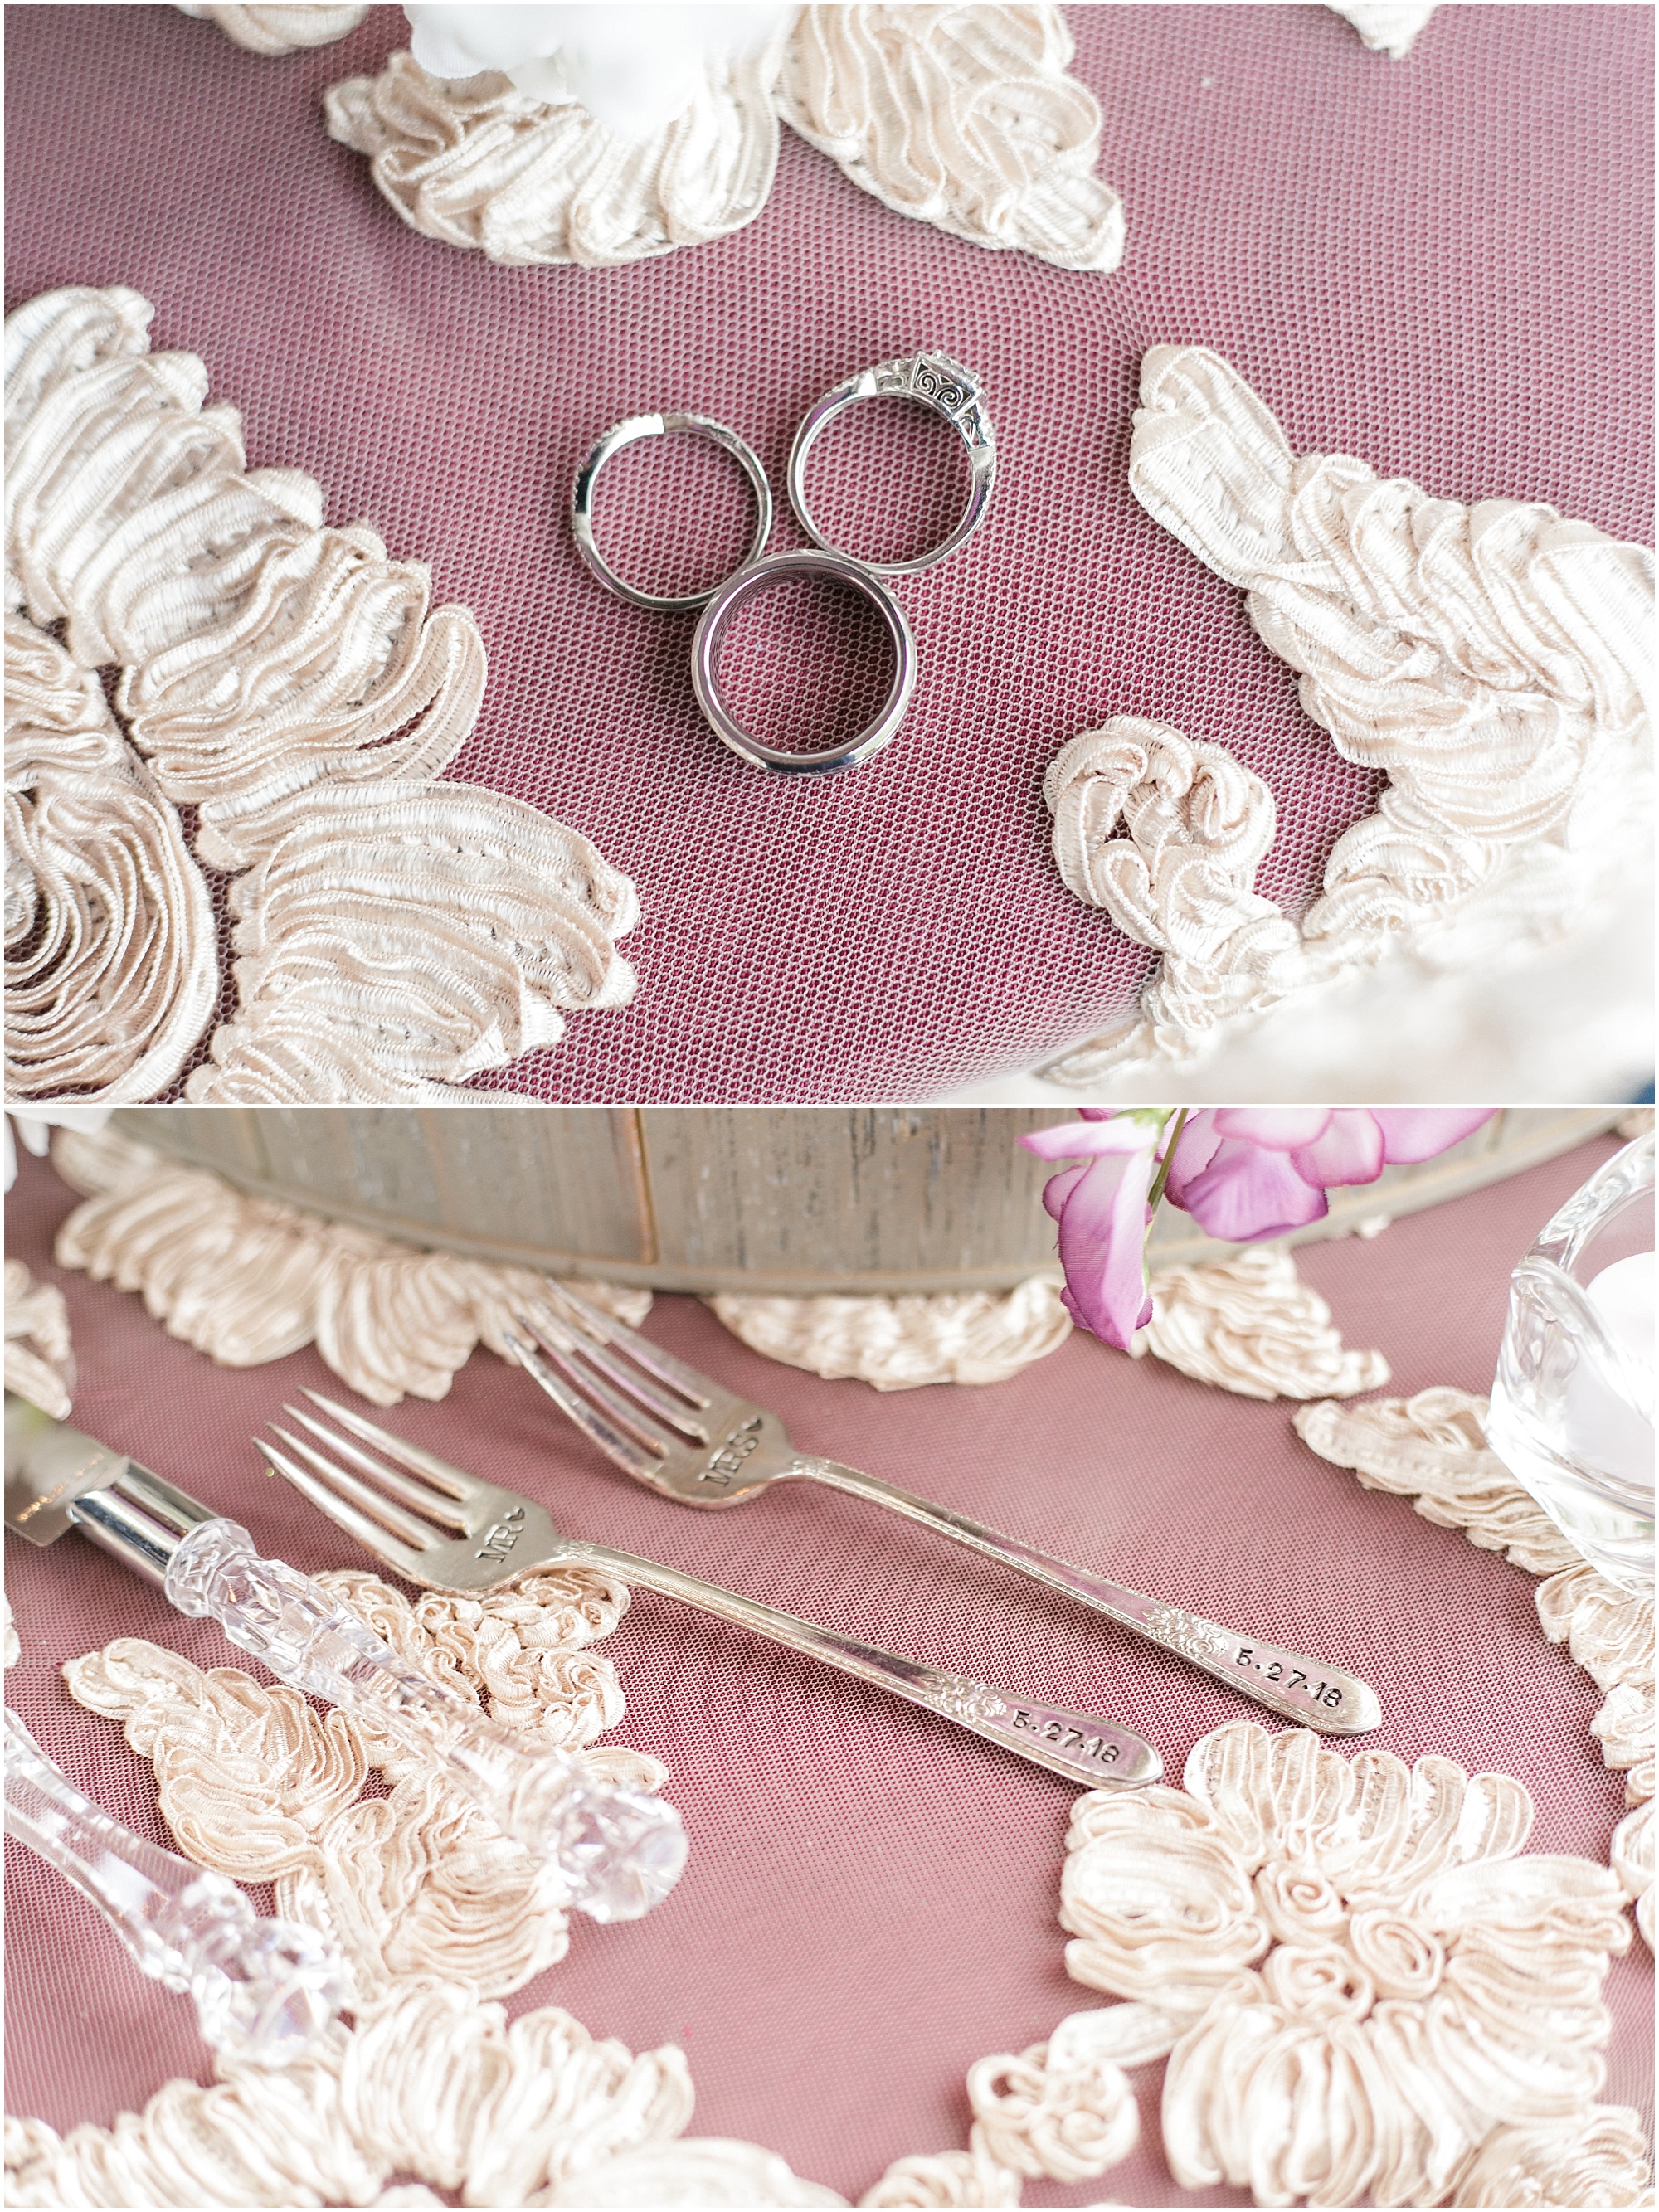 Wedding cake table details like their wedding rings in a Mickey mouse shape and forks engraved with their wedding date. 